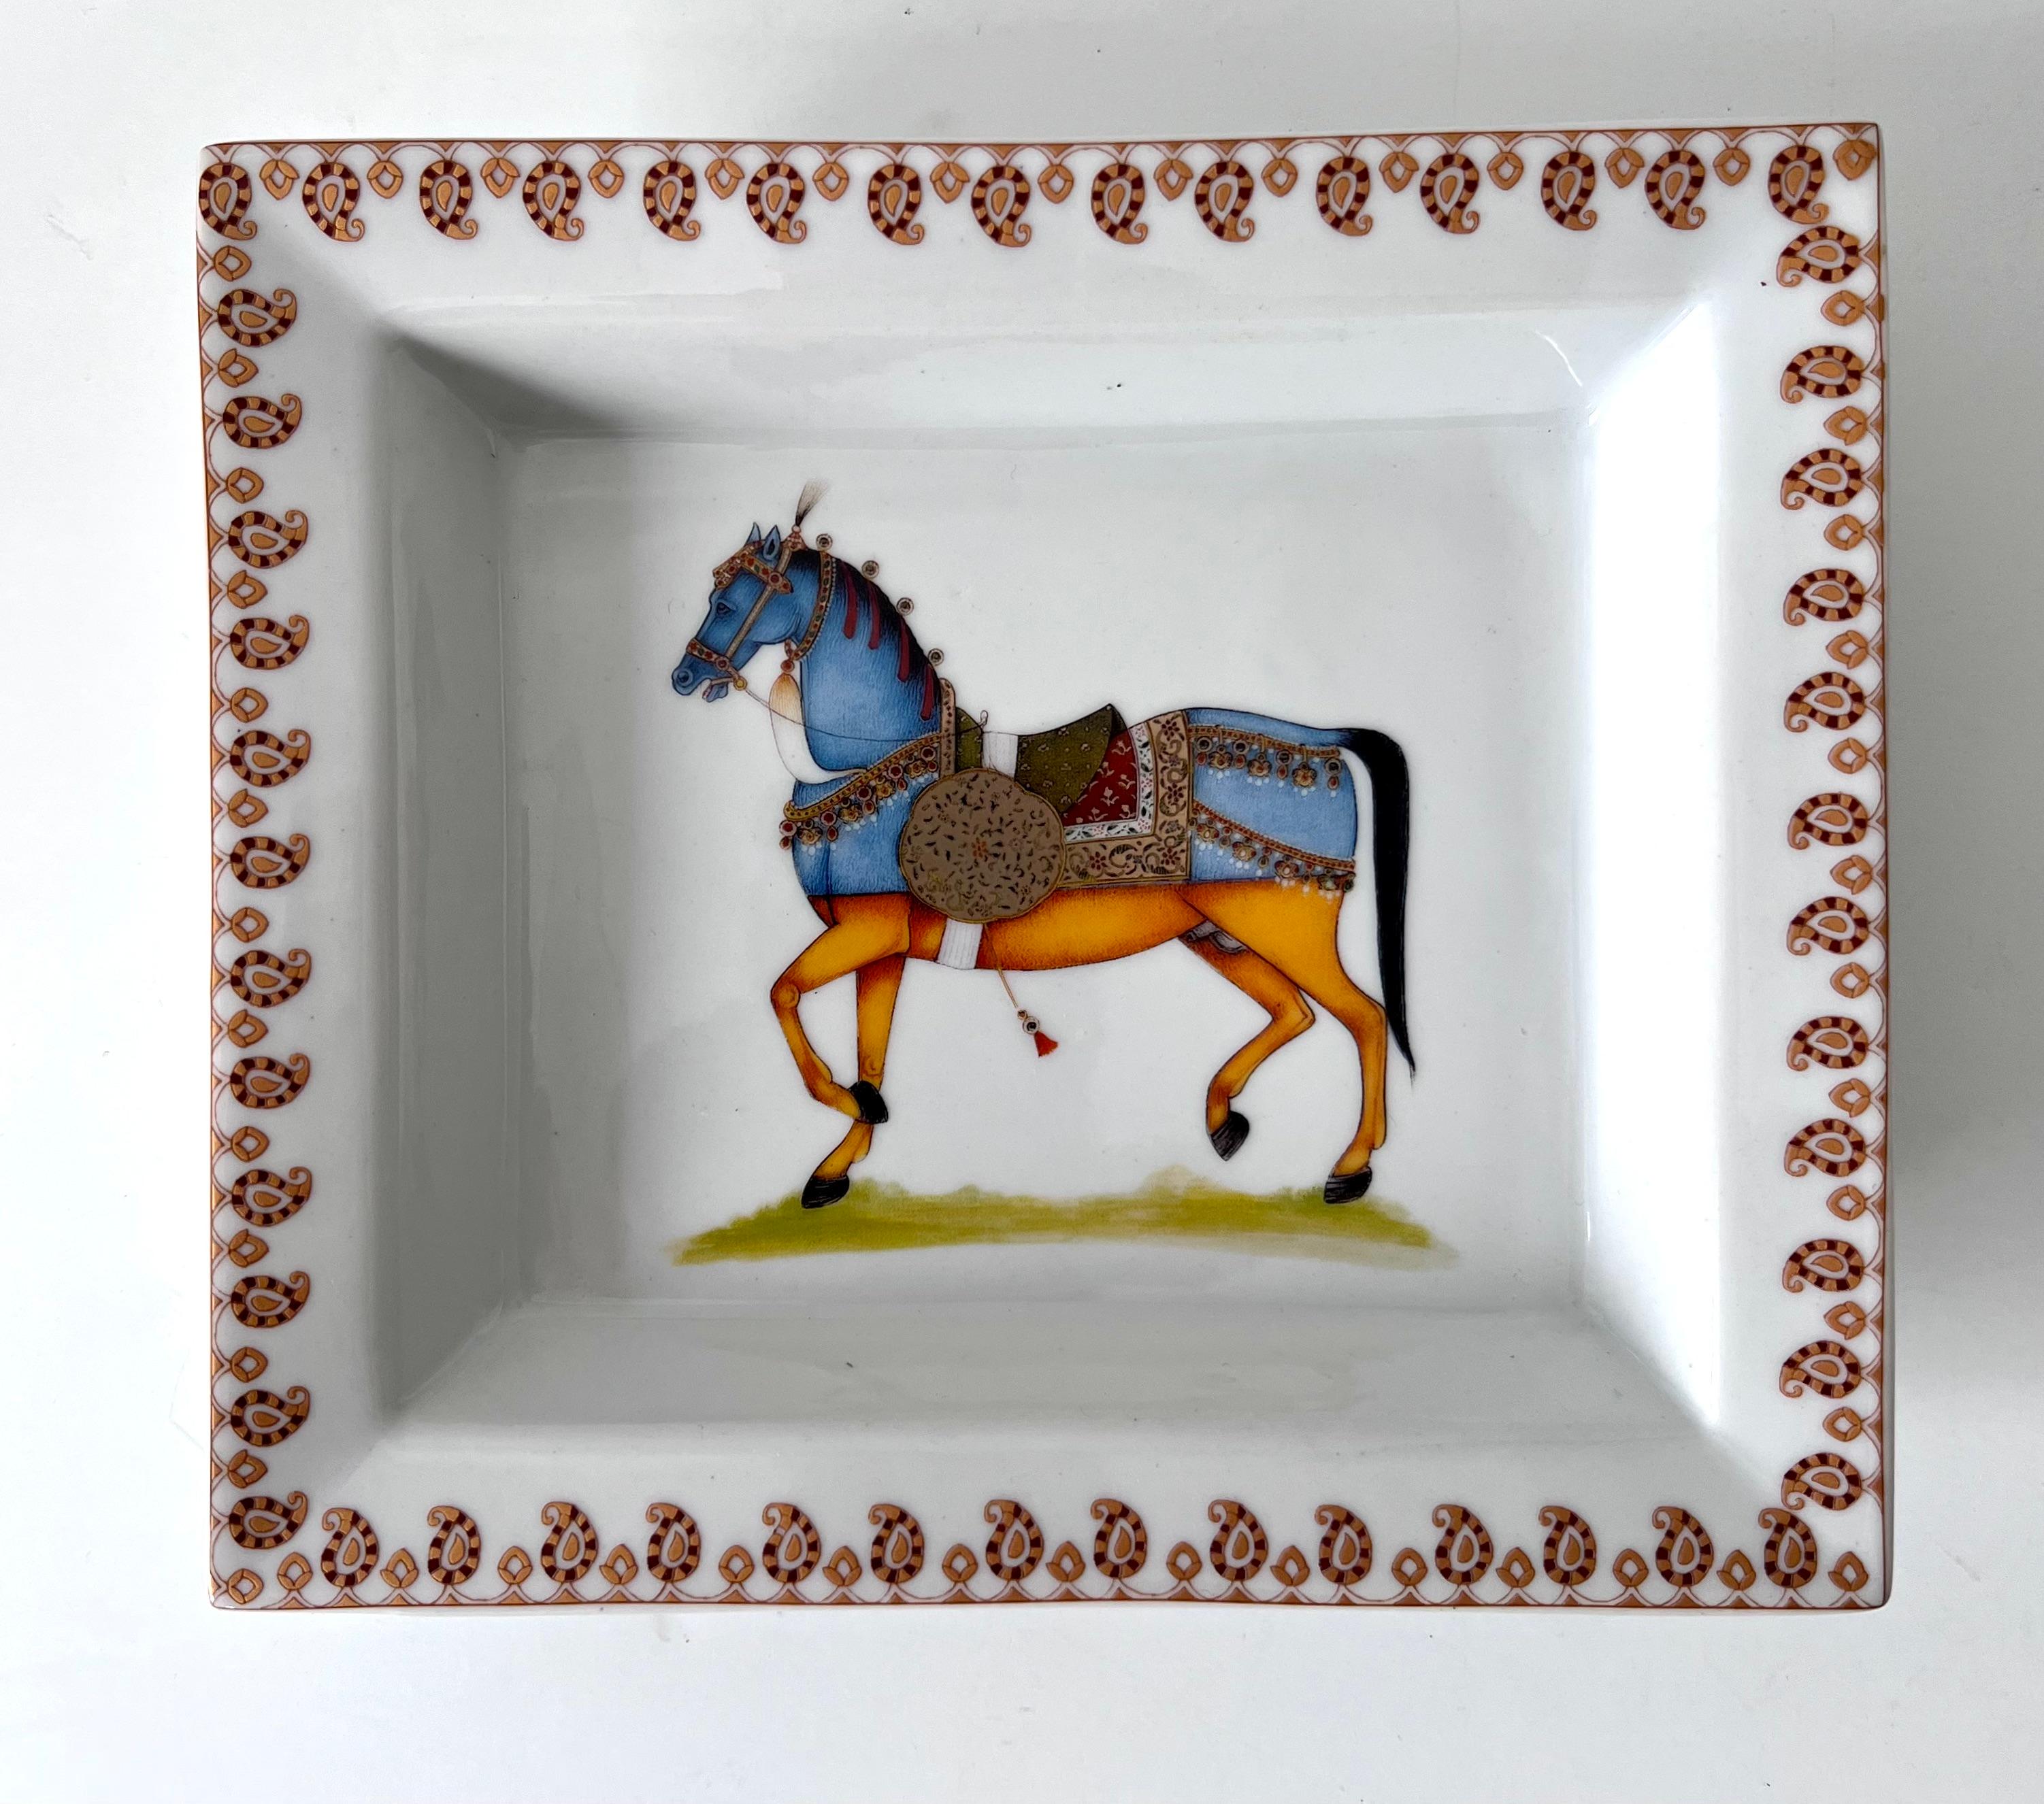 Acquired in Paris, France, a wonderful porcelain Change tray. A compliment to any cocktail table, side table or entry table... perfectly lovely as a stand alone decorative piece, however could be used for serving nuts or candy and also a nice